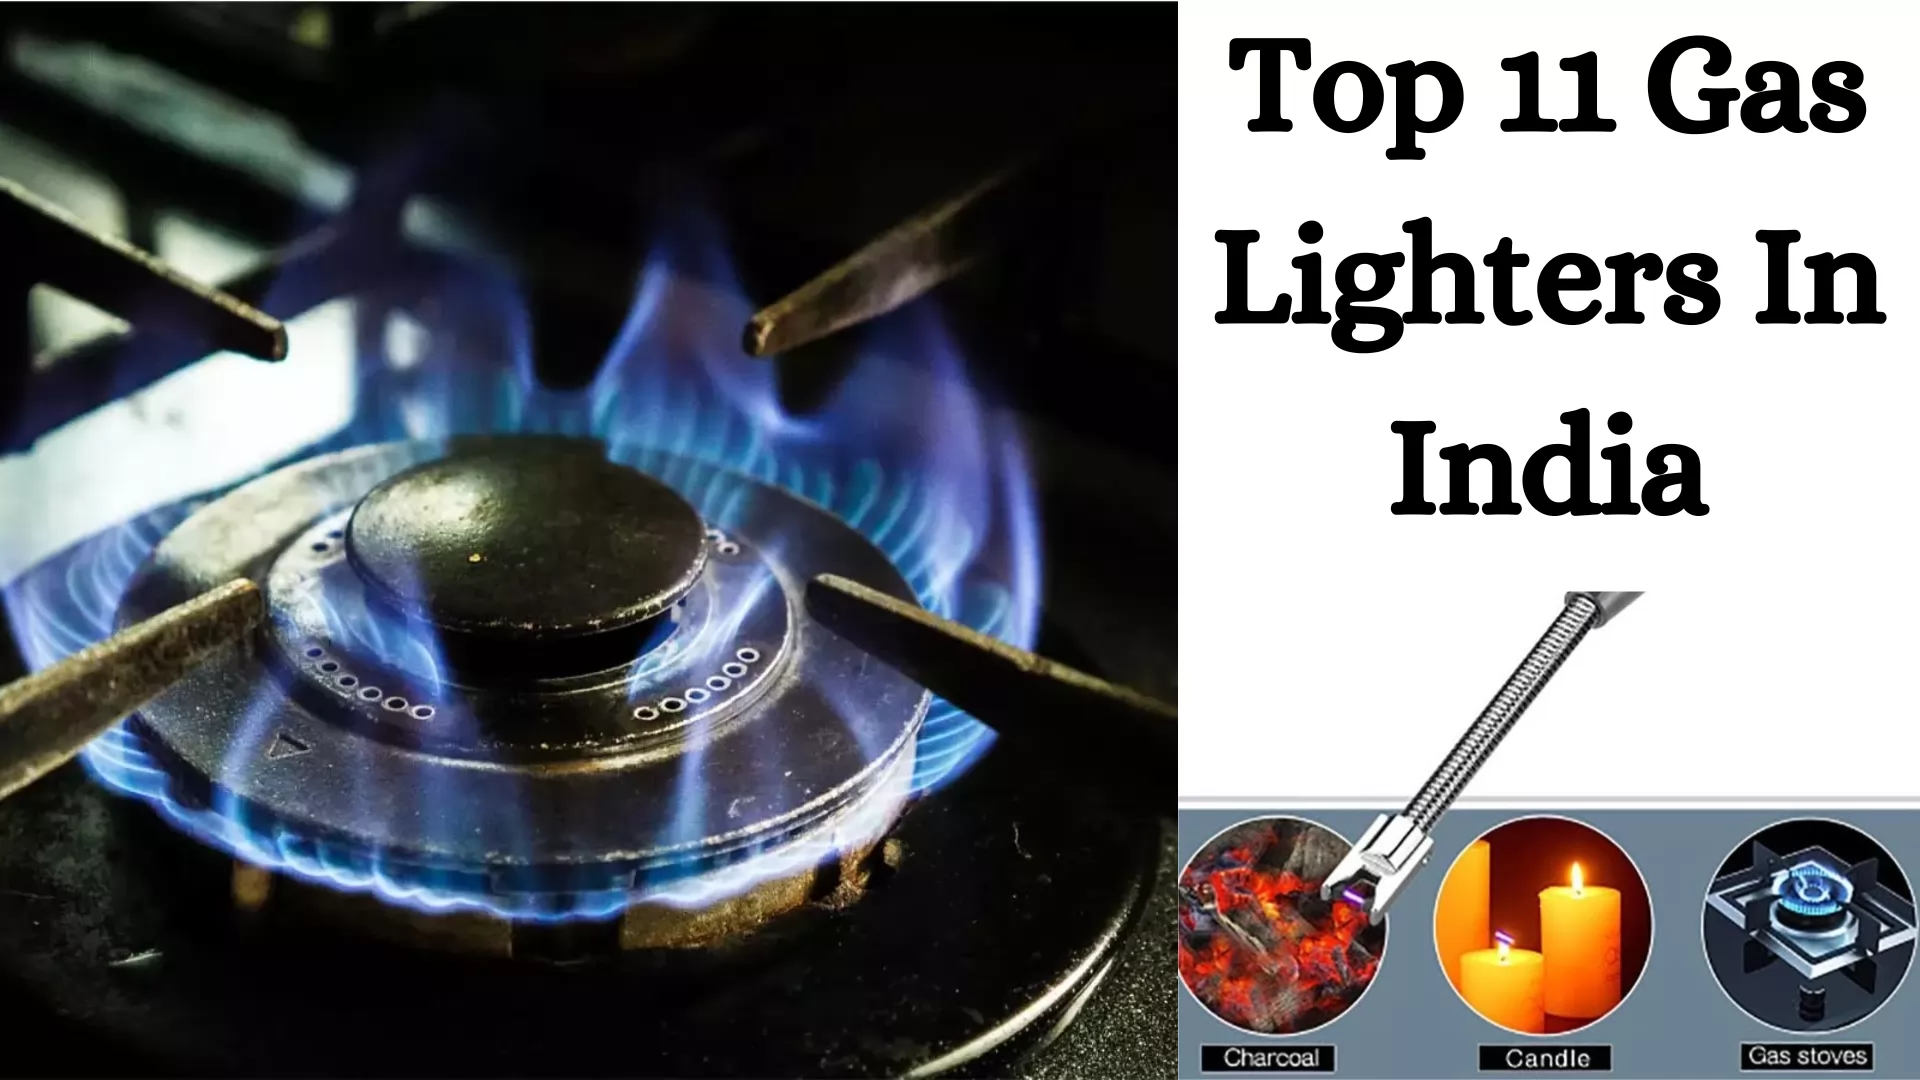 Top 11 Gas Lighter In India